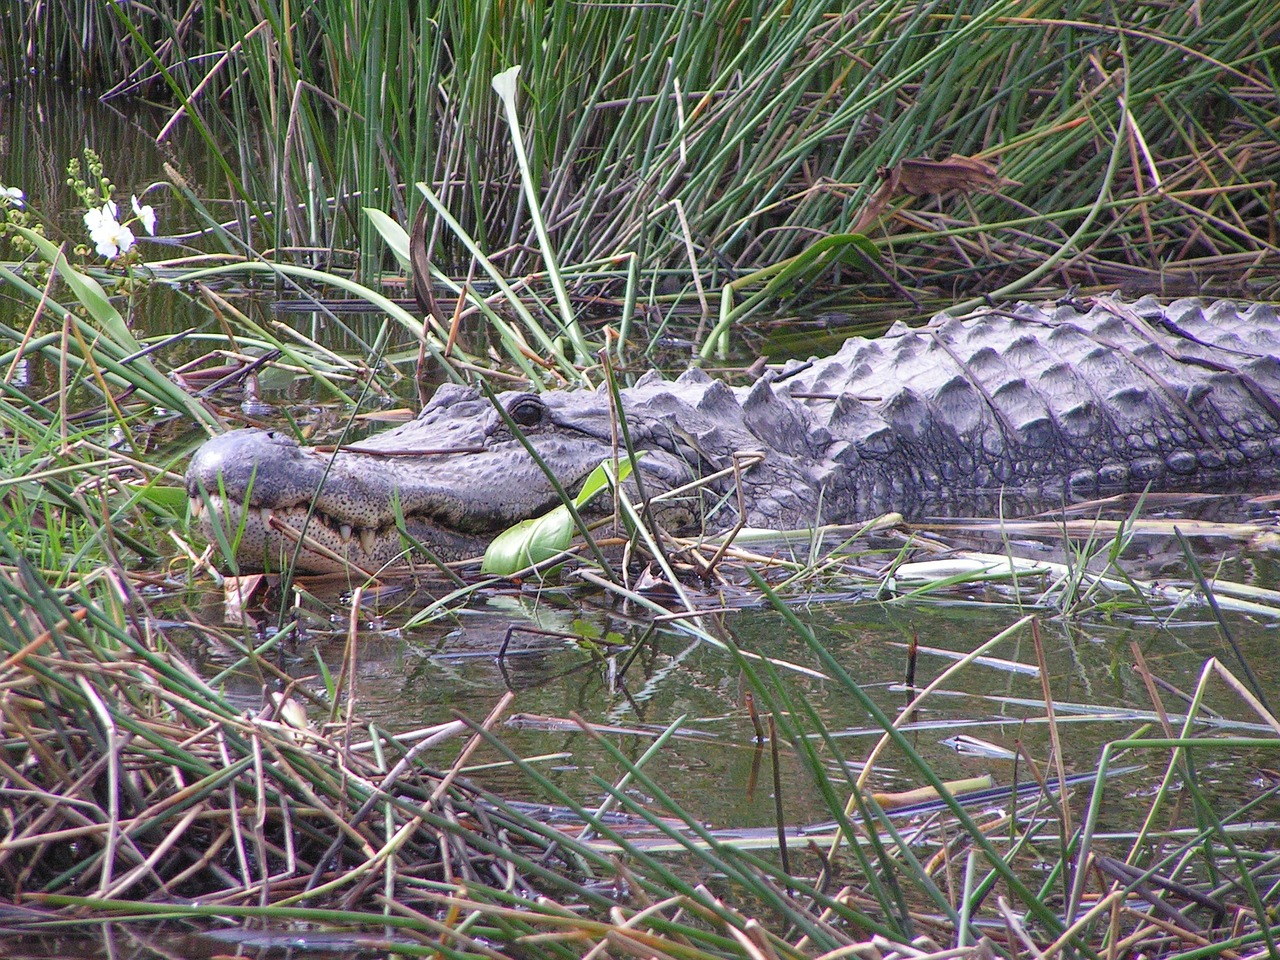 A crocodile in a Panama City conservation